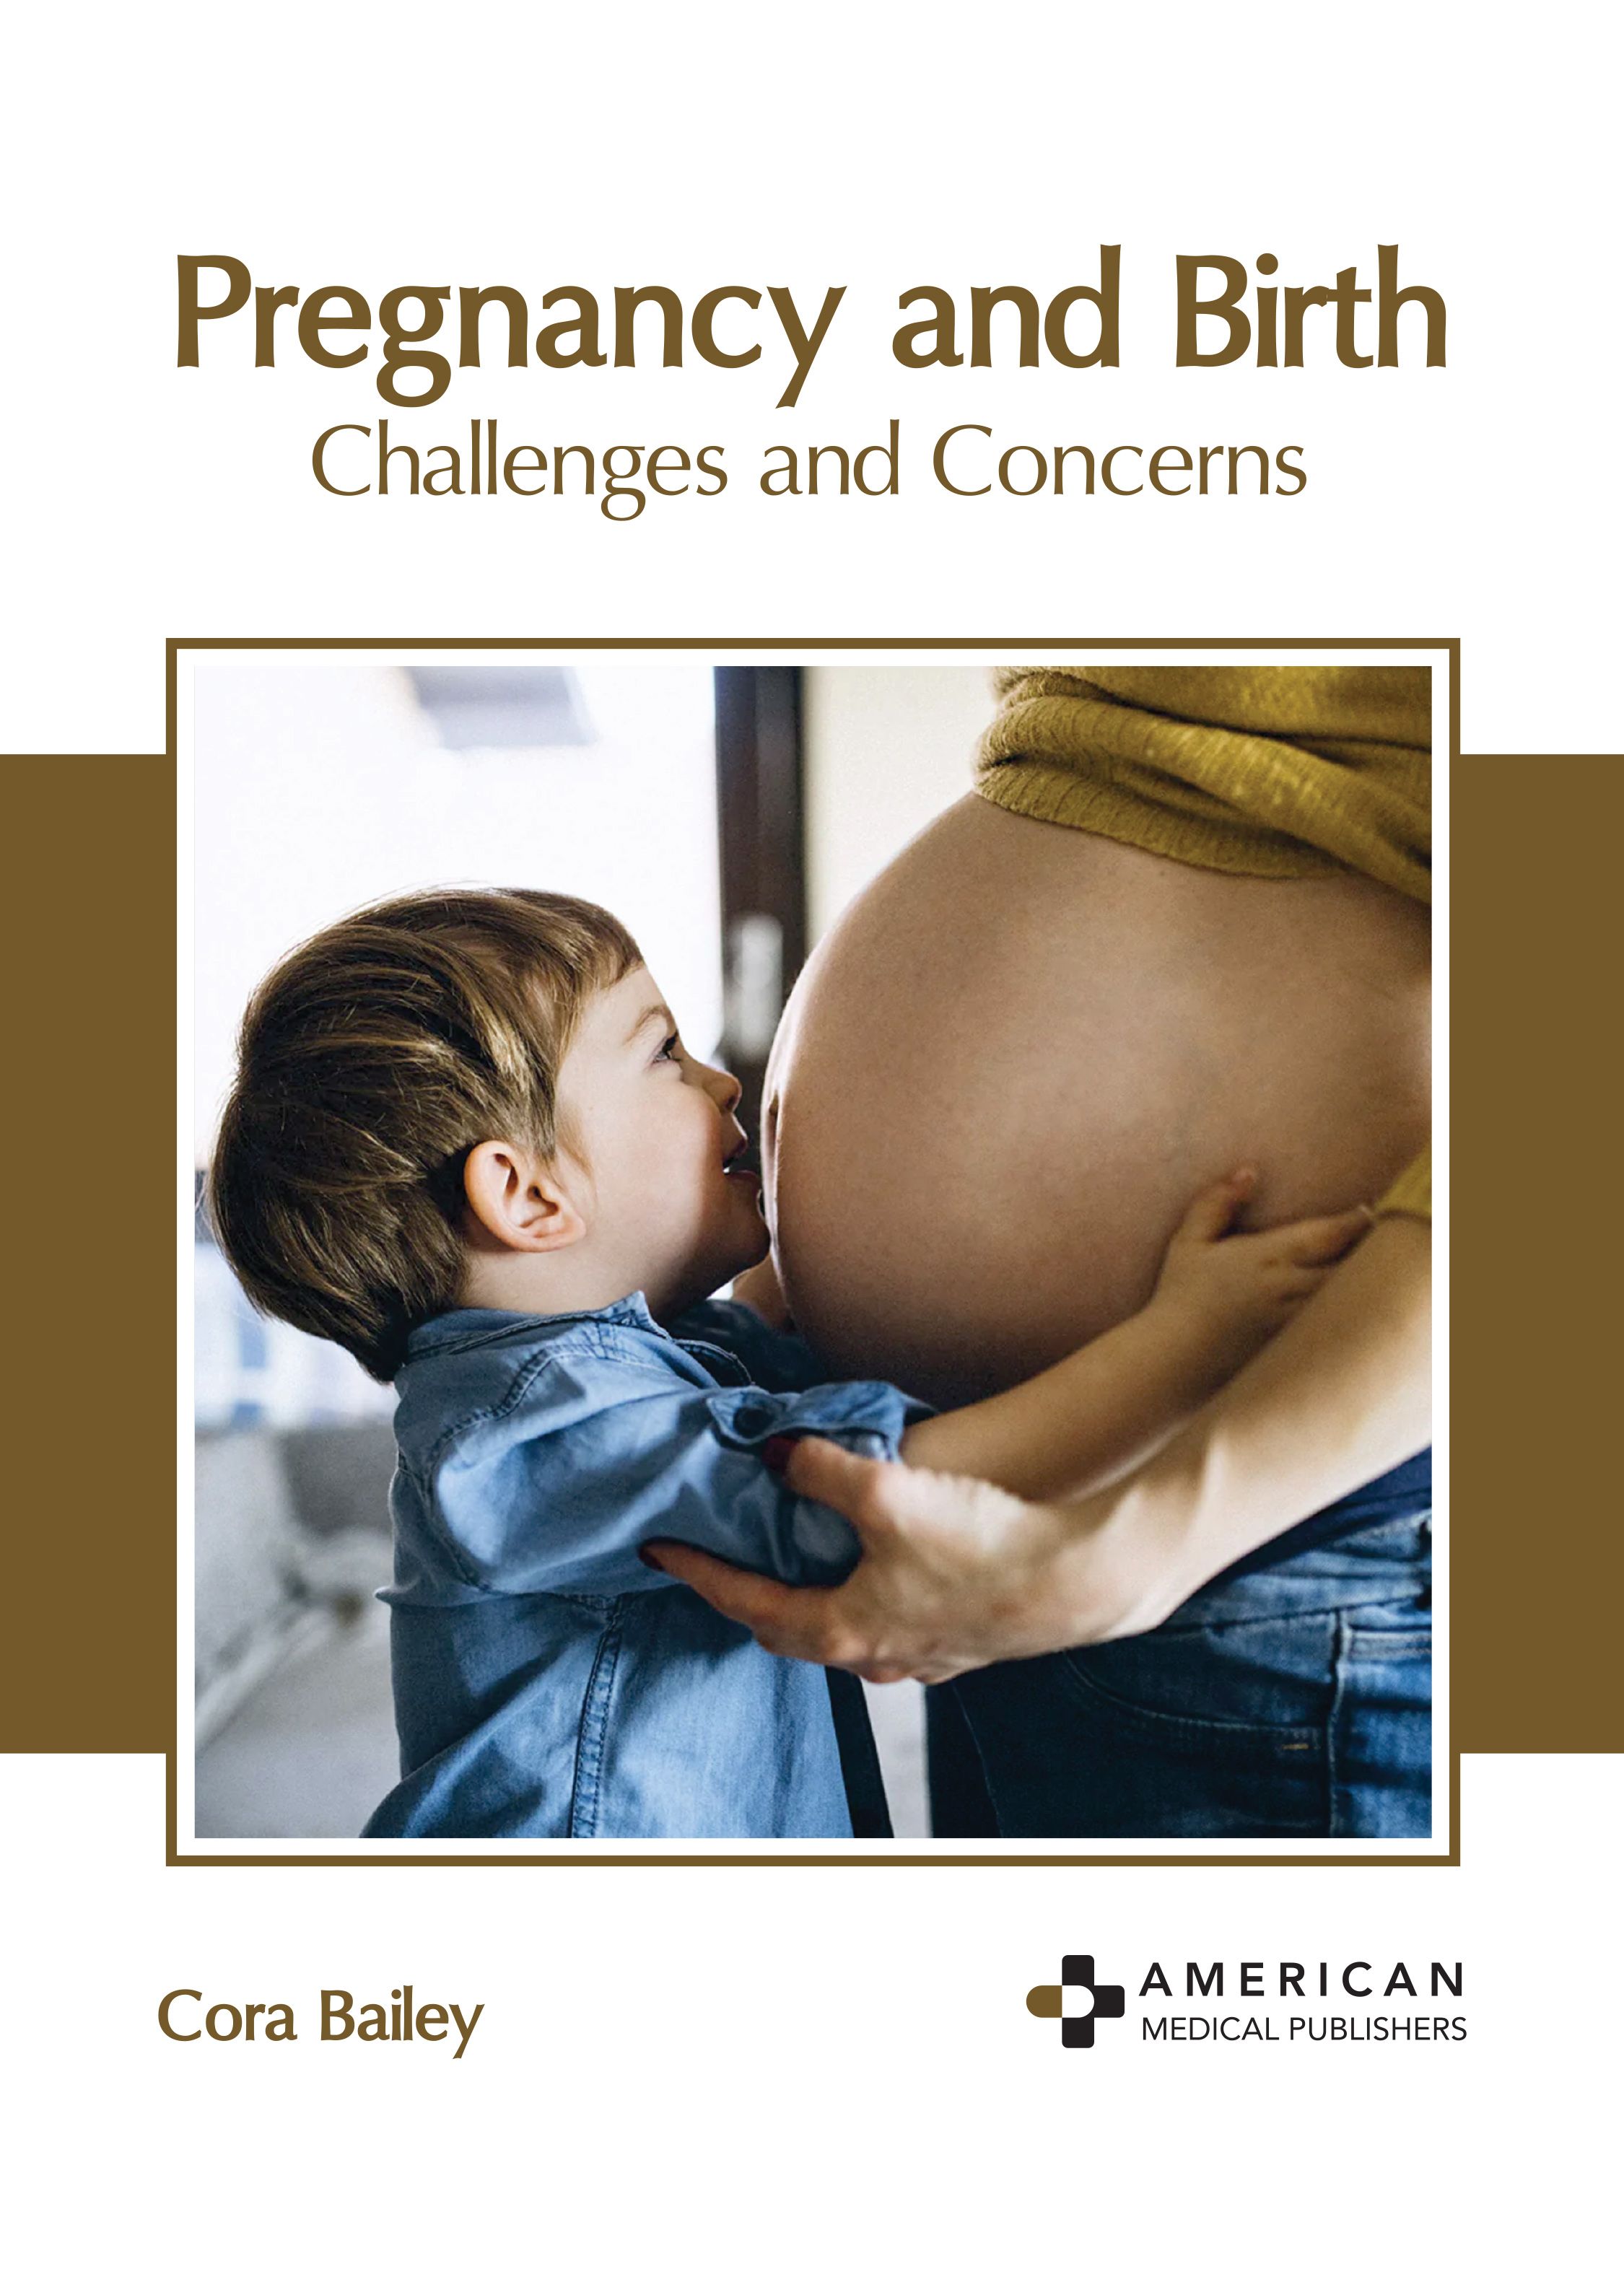 

exclusive-publishers/american-medical-publishers/pregnancy-and-birth-challenges-and-concerns-9798887403885